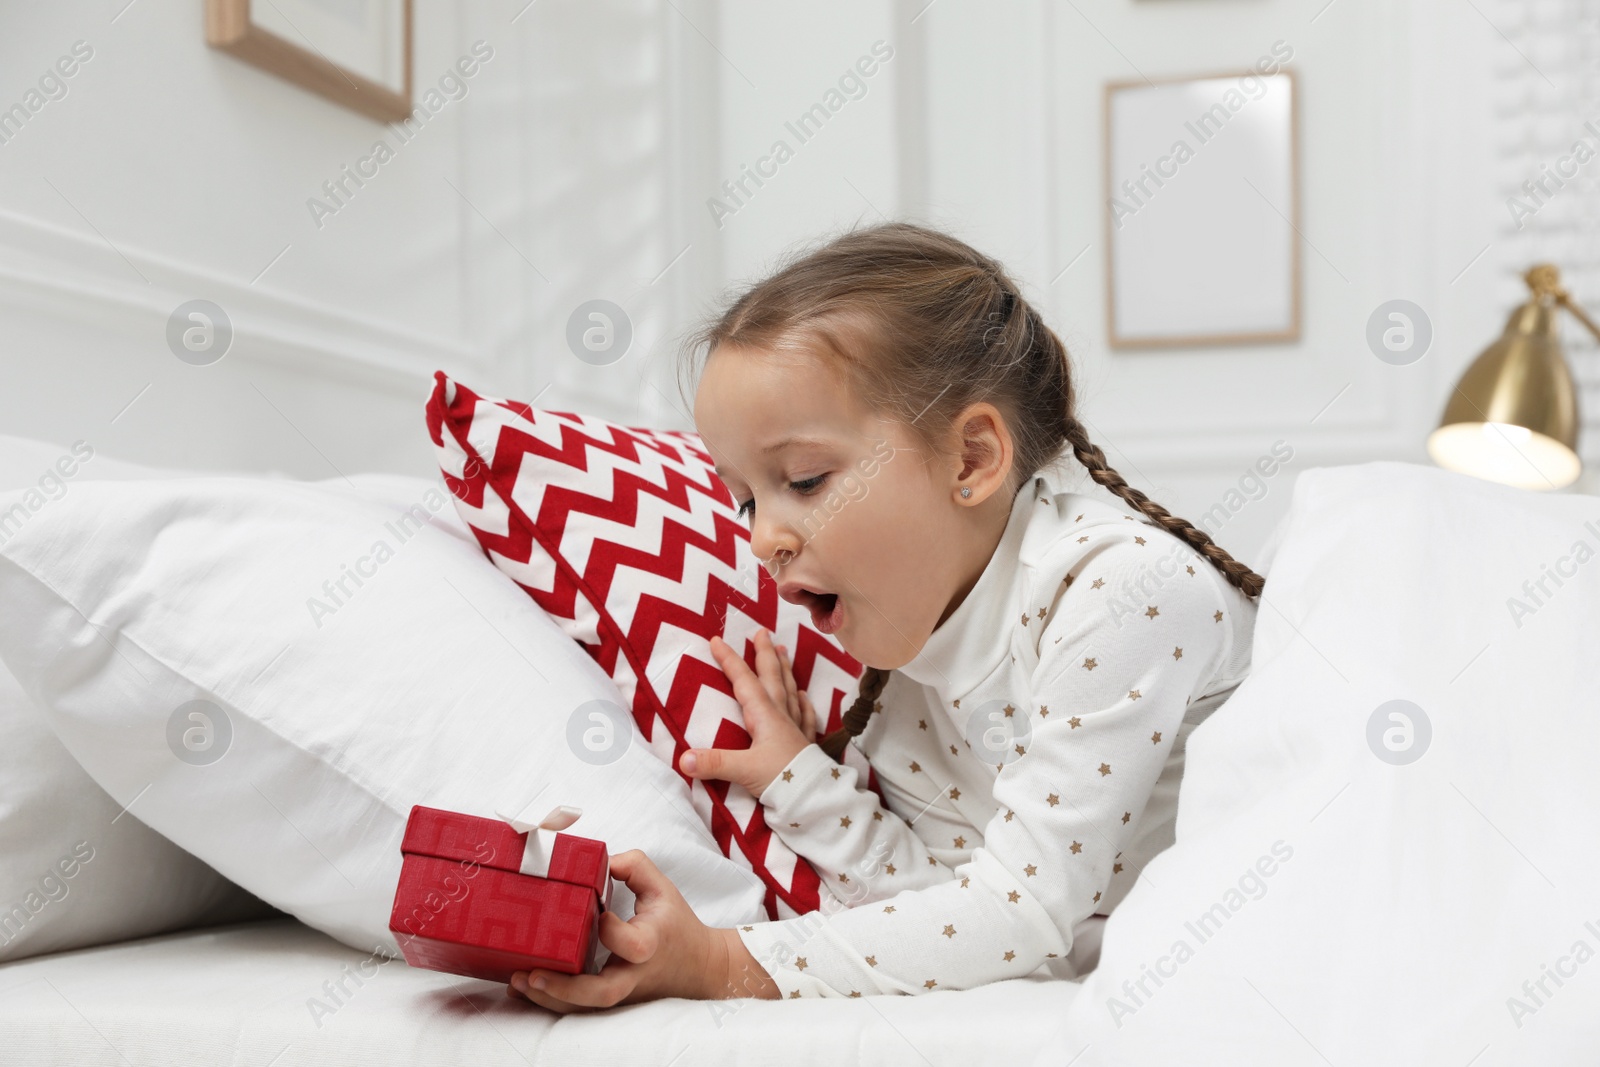 Photo of Excited little girl finding gift box under pillow in bed at home. Saint Nicholas day tradition